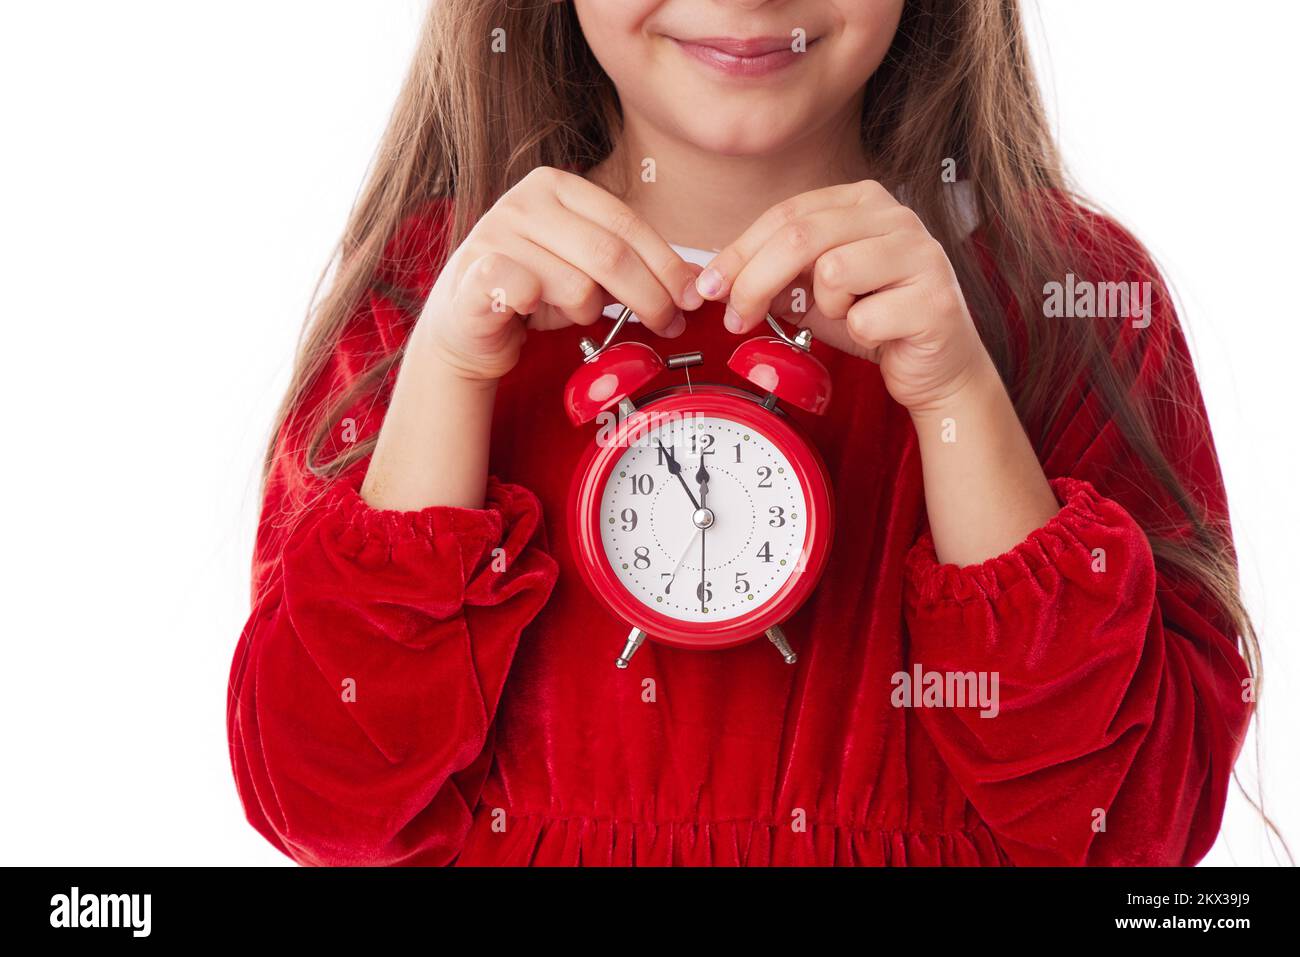 Christmas woman with red alarm clock, smiling girl in red Santa claus dress posing on white background Stock Photo